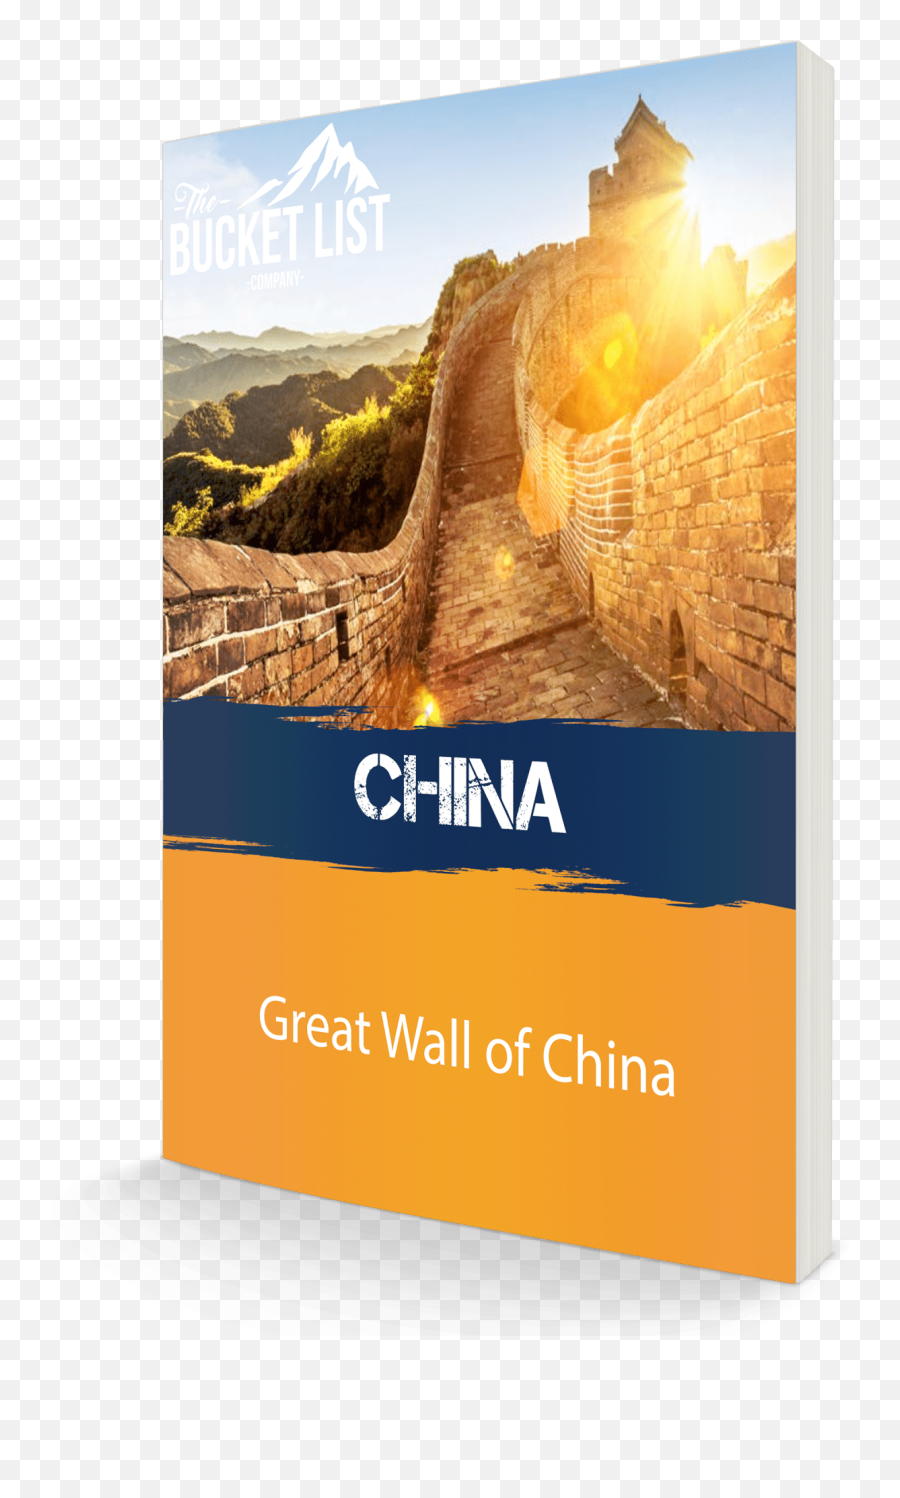 Download Our Guide To The Great Wall Of China - Flyer Png,Great Wall Of China Png